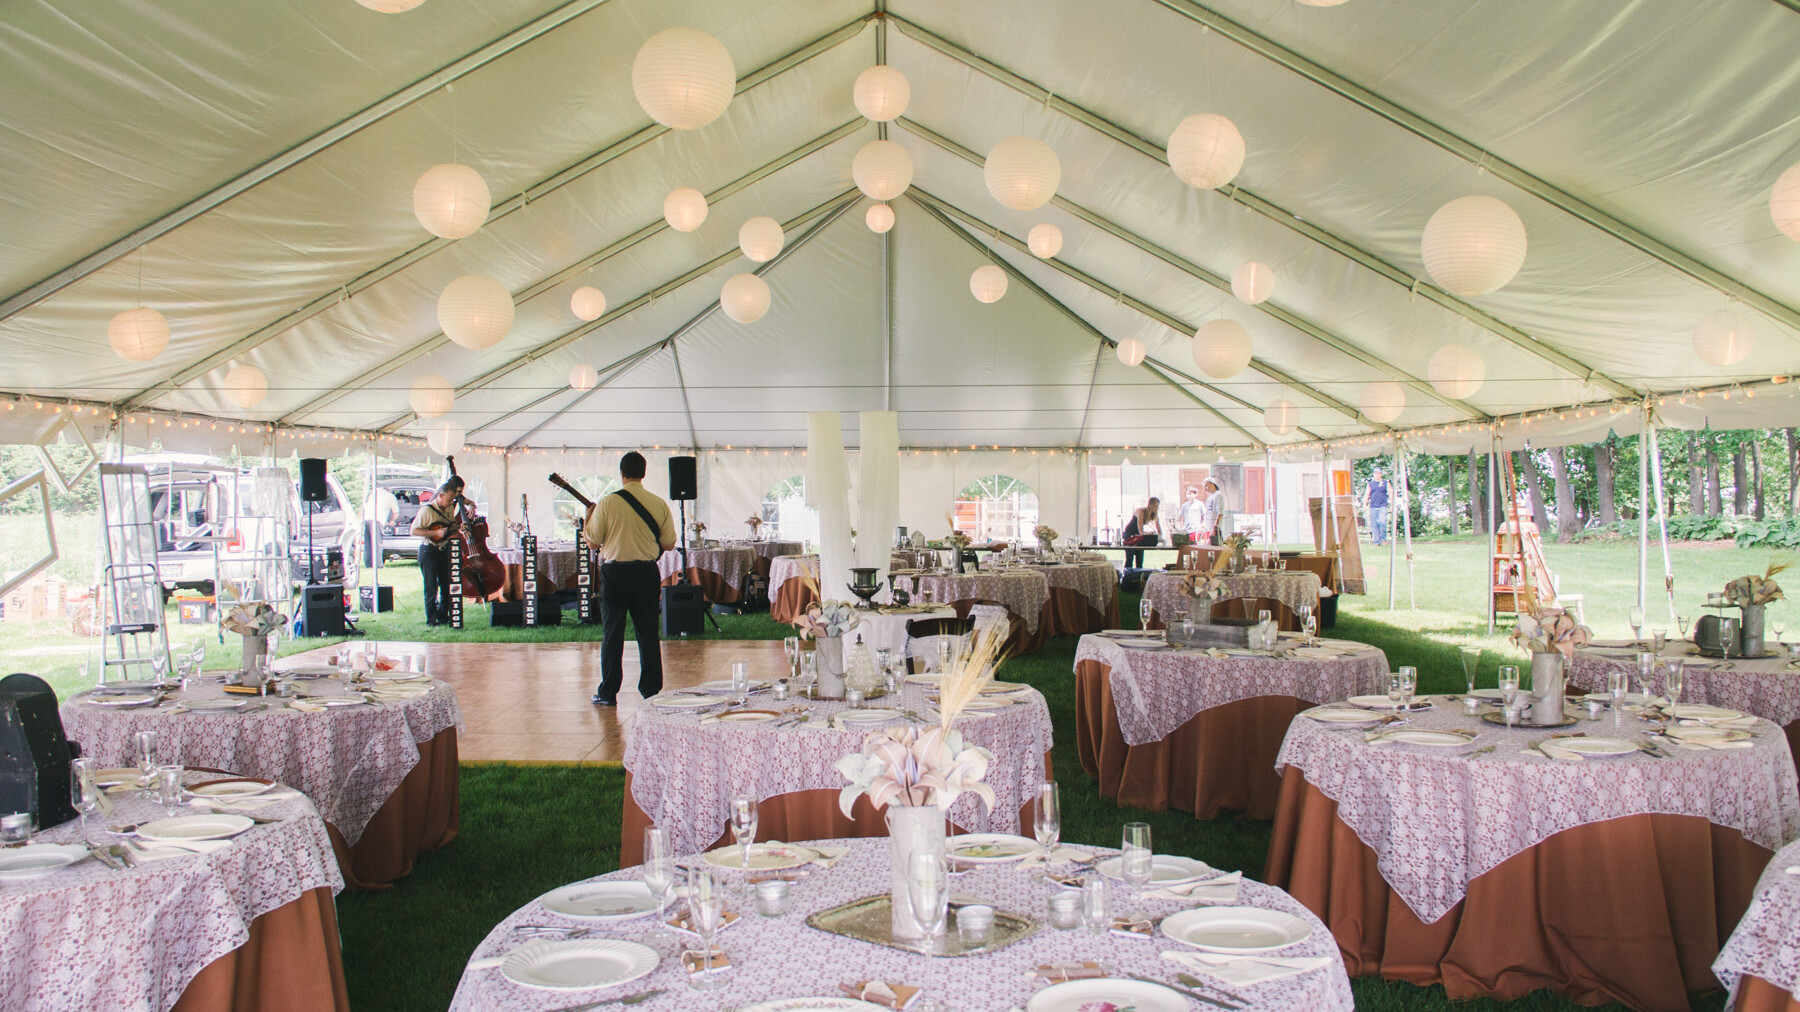 Inside a large frame wedding tent with globe lights, elegant tables and a dance floor.